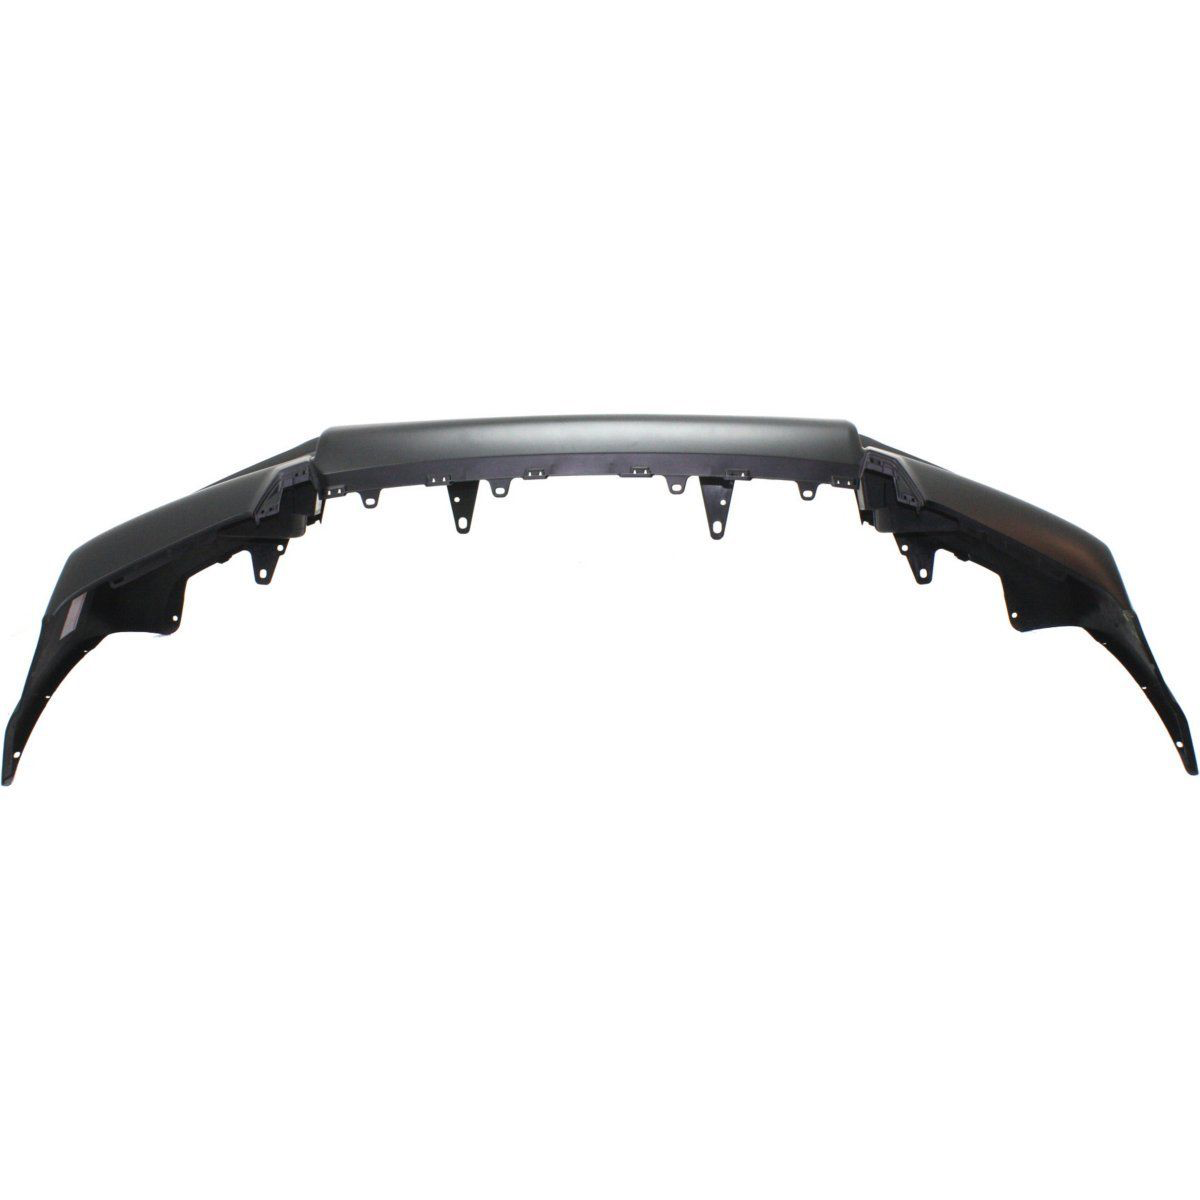 2010-2013 TOYOTA 4RUNNER Front Bumper Cover w/Chrome Trim  From 1-10 Painted to Match